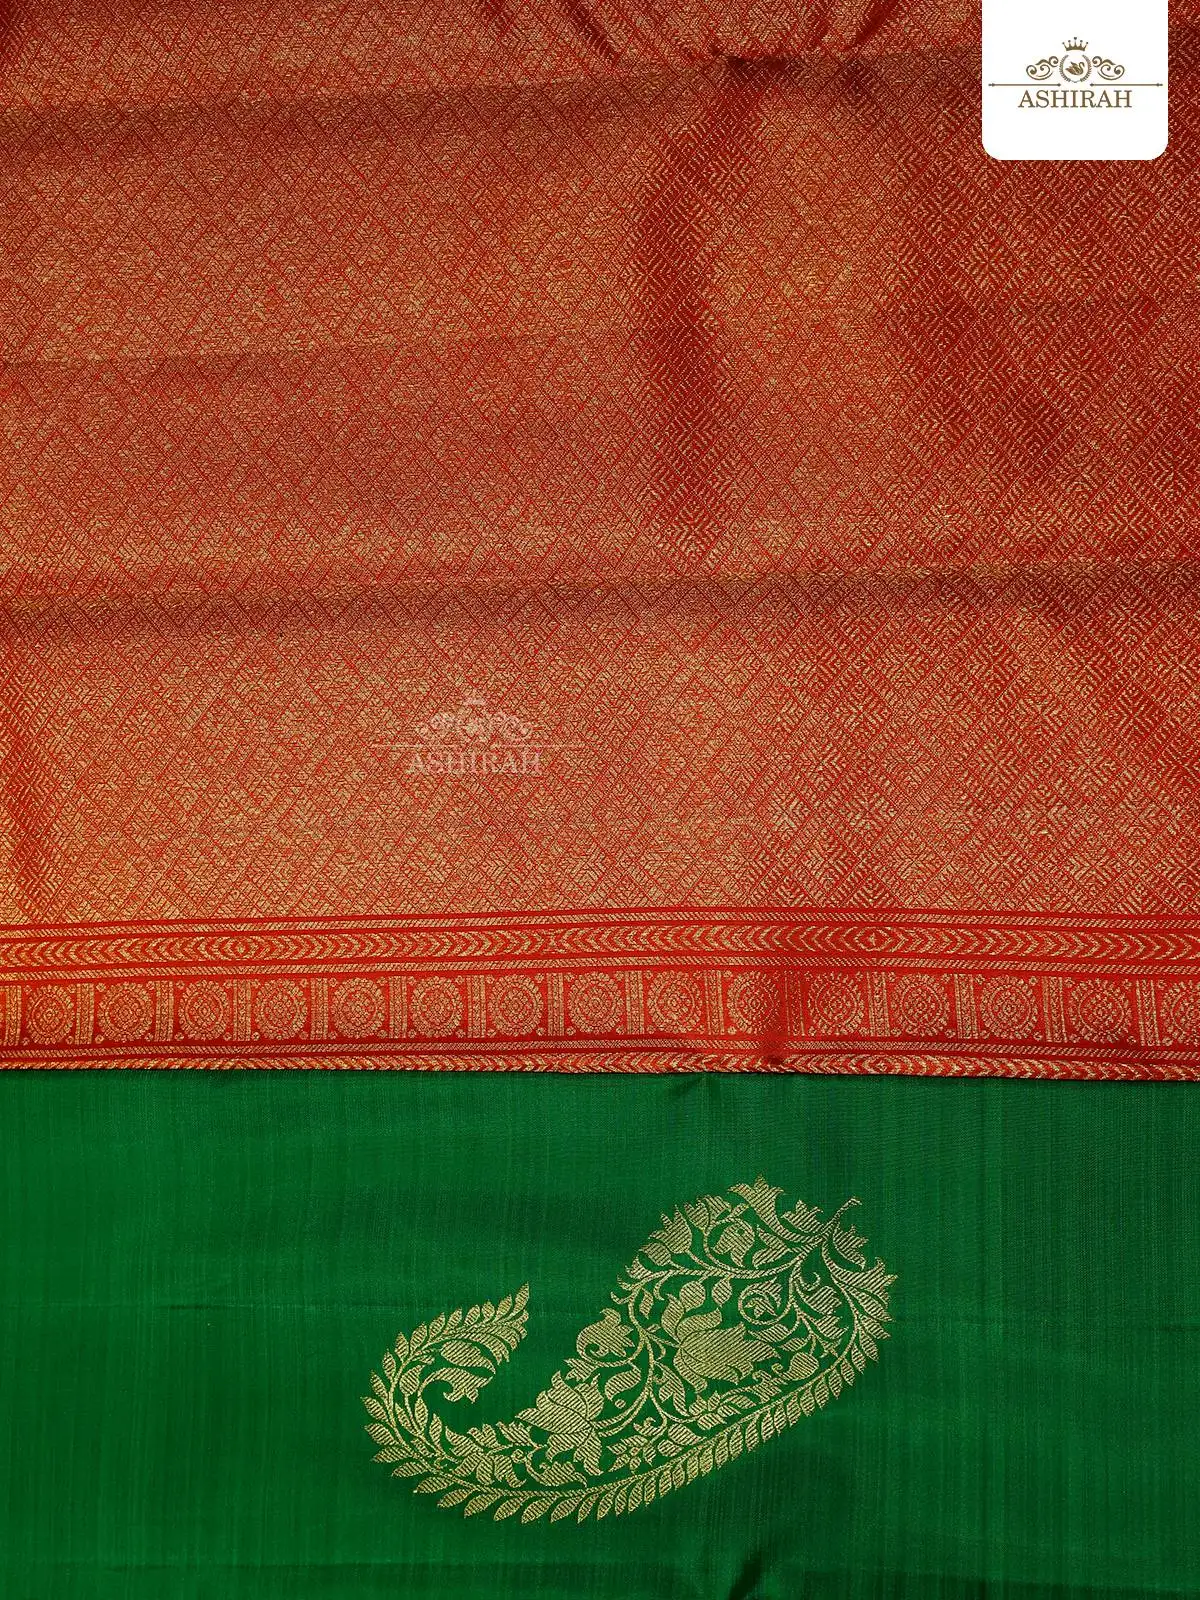 Green Pure Kanchipuram Silk Saree With Paisley Motifs On The Body And Without Border